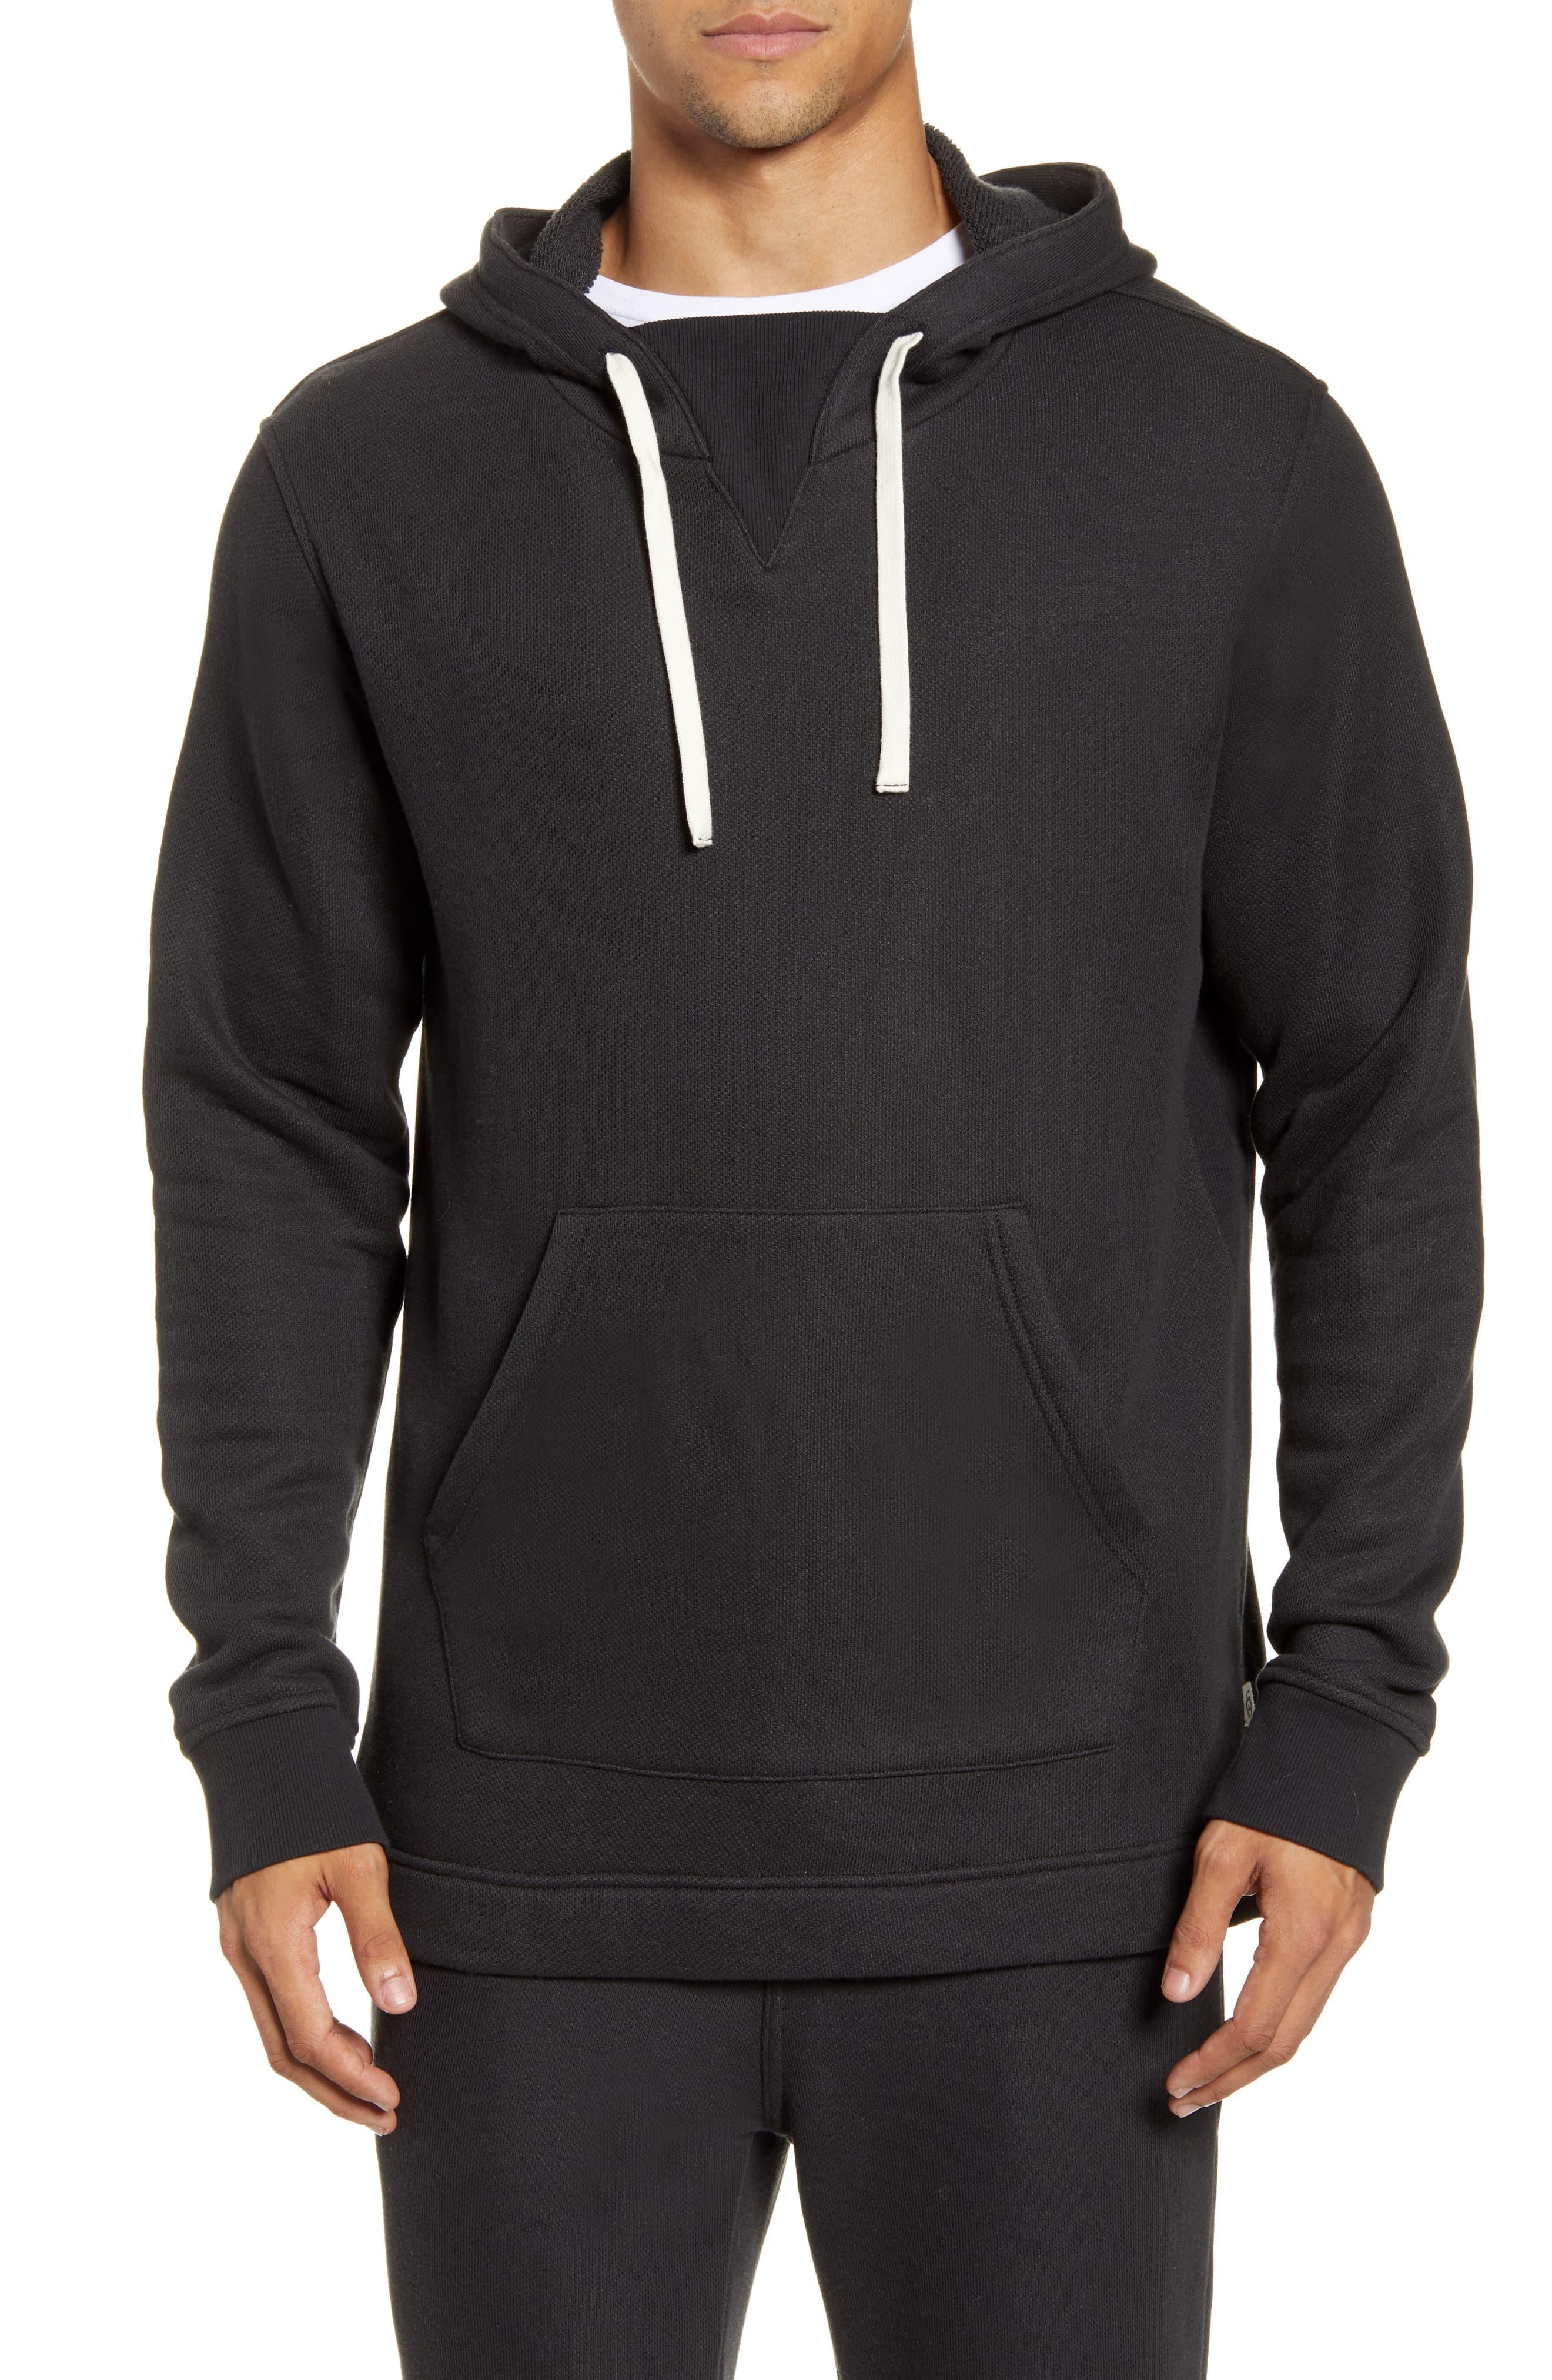 UGG Terrell Pullover Hoodie in Black for Men - Save 1% - Lyst